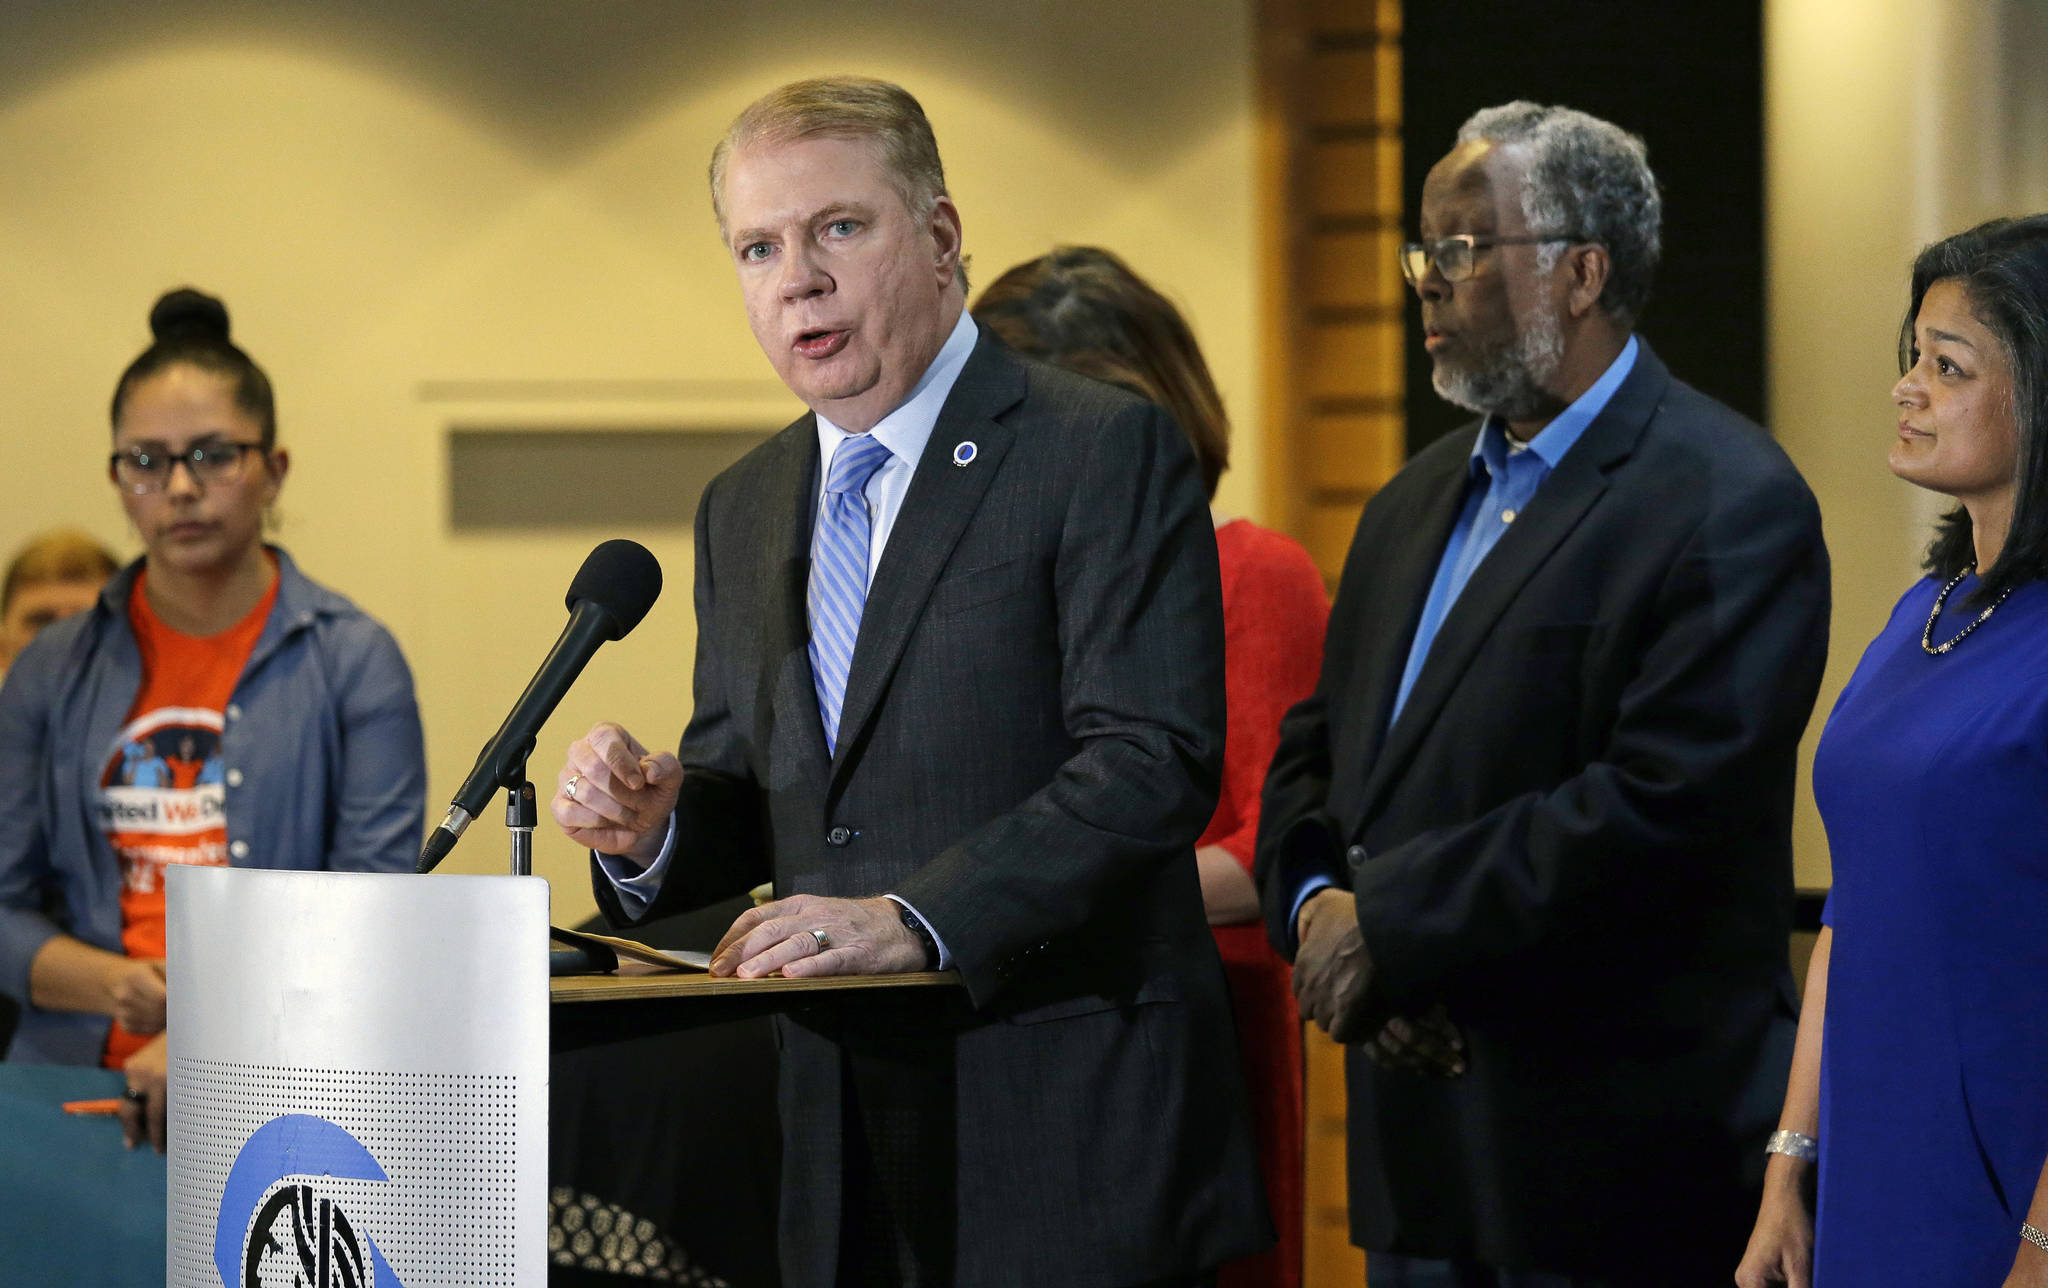 In this Nov. 9, 2016, photo, Seattle Mayor Ed Murray, second from left, speaks at a post-election event of elected officials and community leaders at City Hall in Seattle. (Elaine Thompson/The Associated Press)